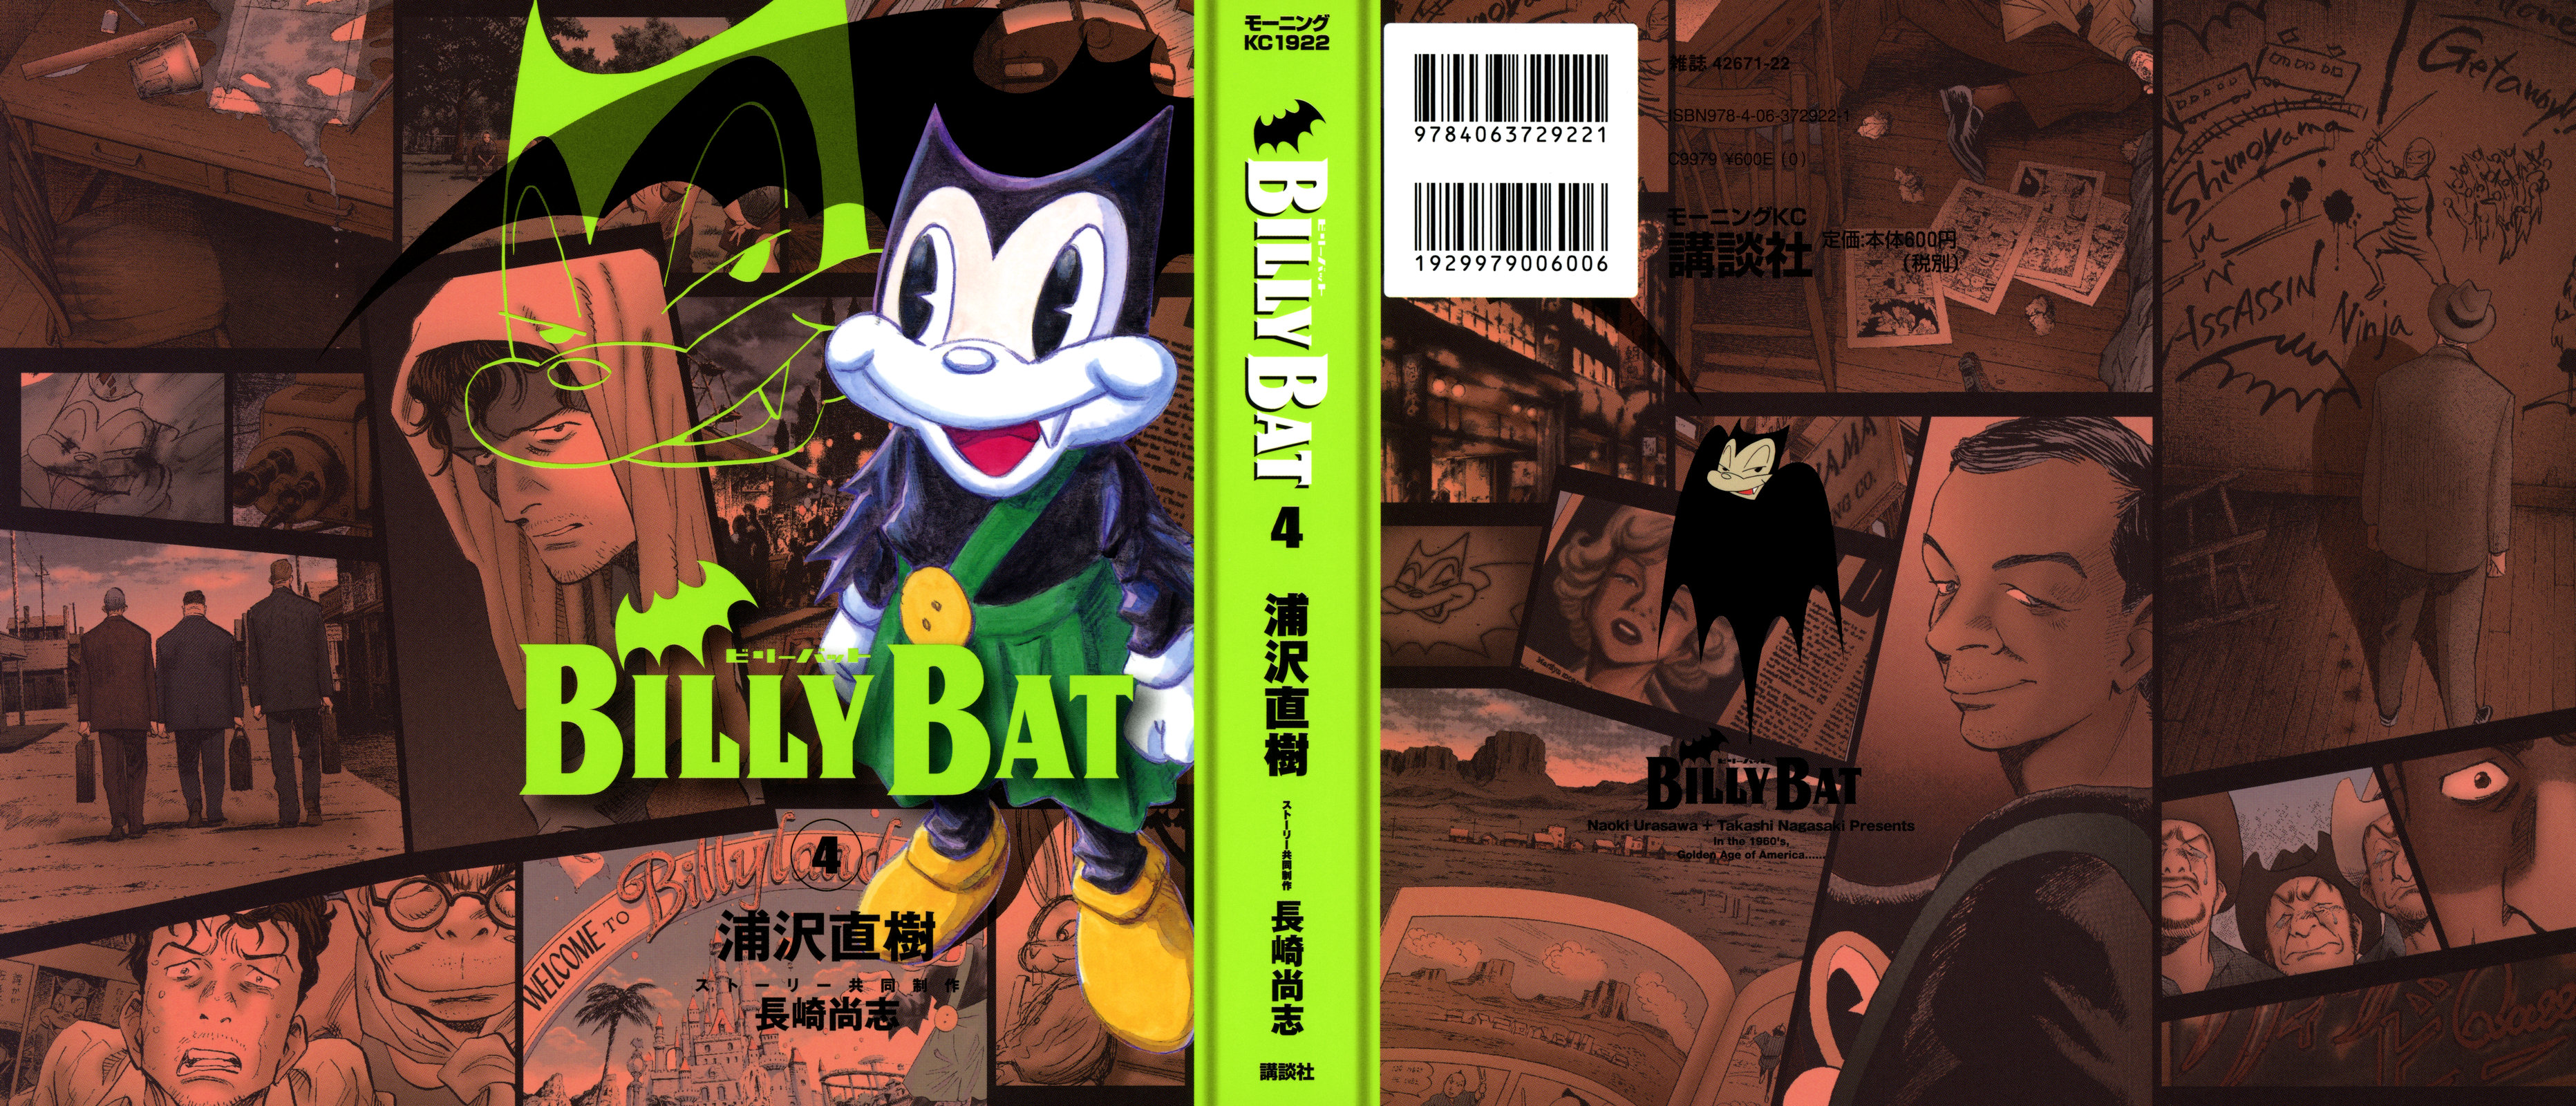 Billy Bat and Scan Gallery